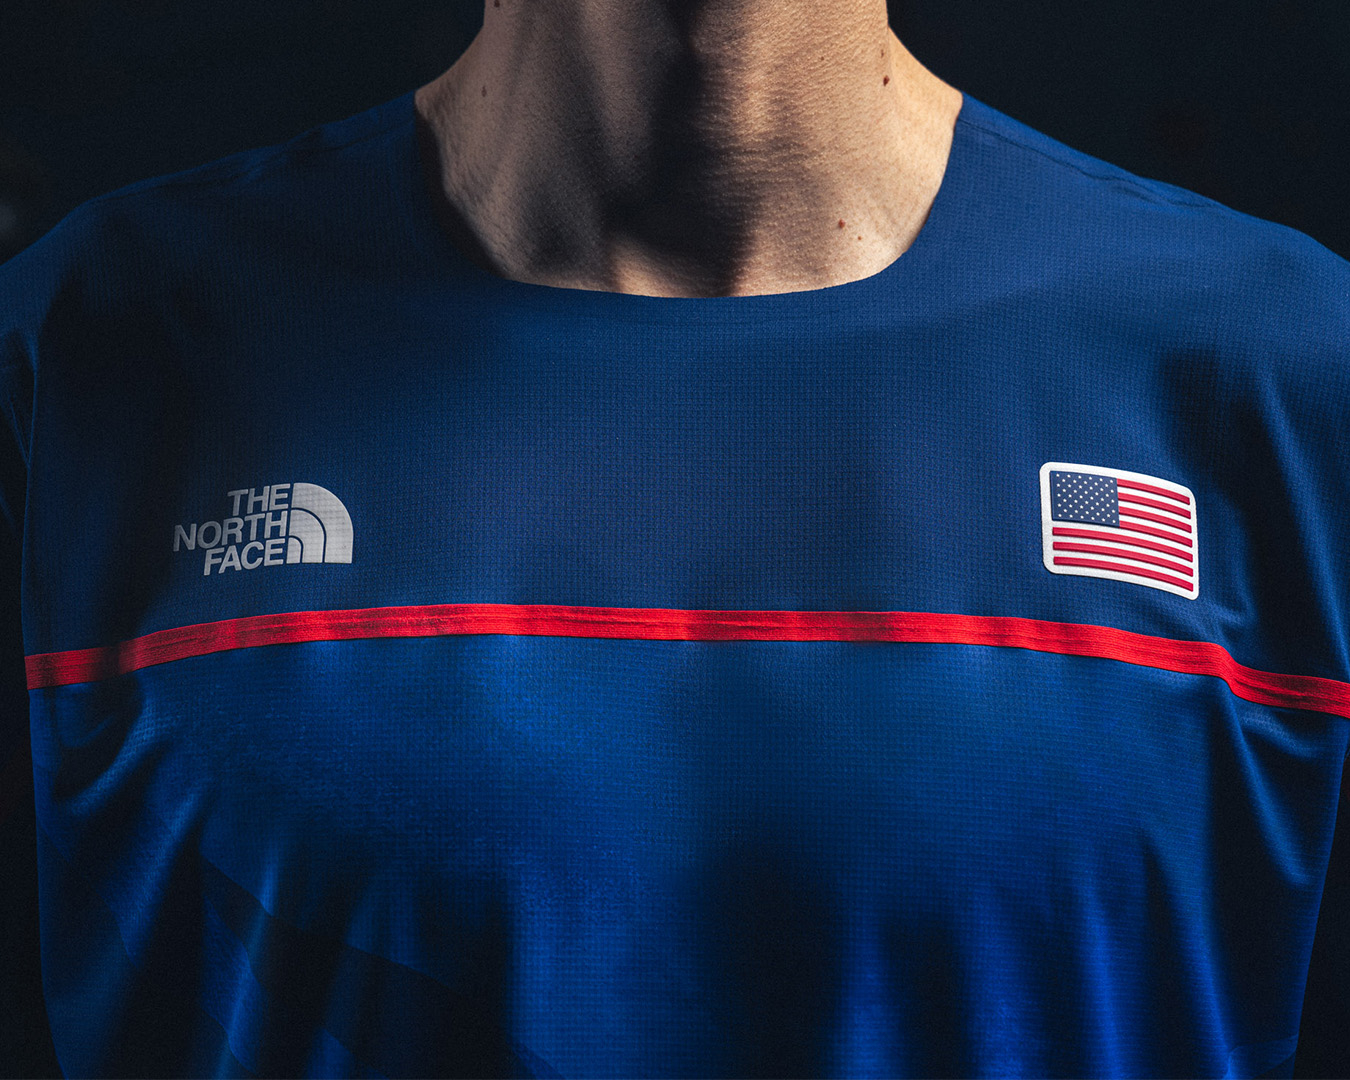 Person in a blue The North Face shirt with a USA flag and brand logo on the chest